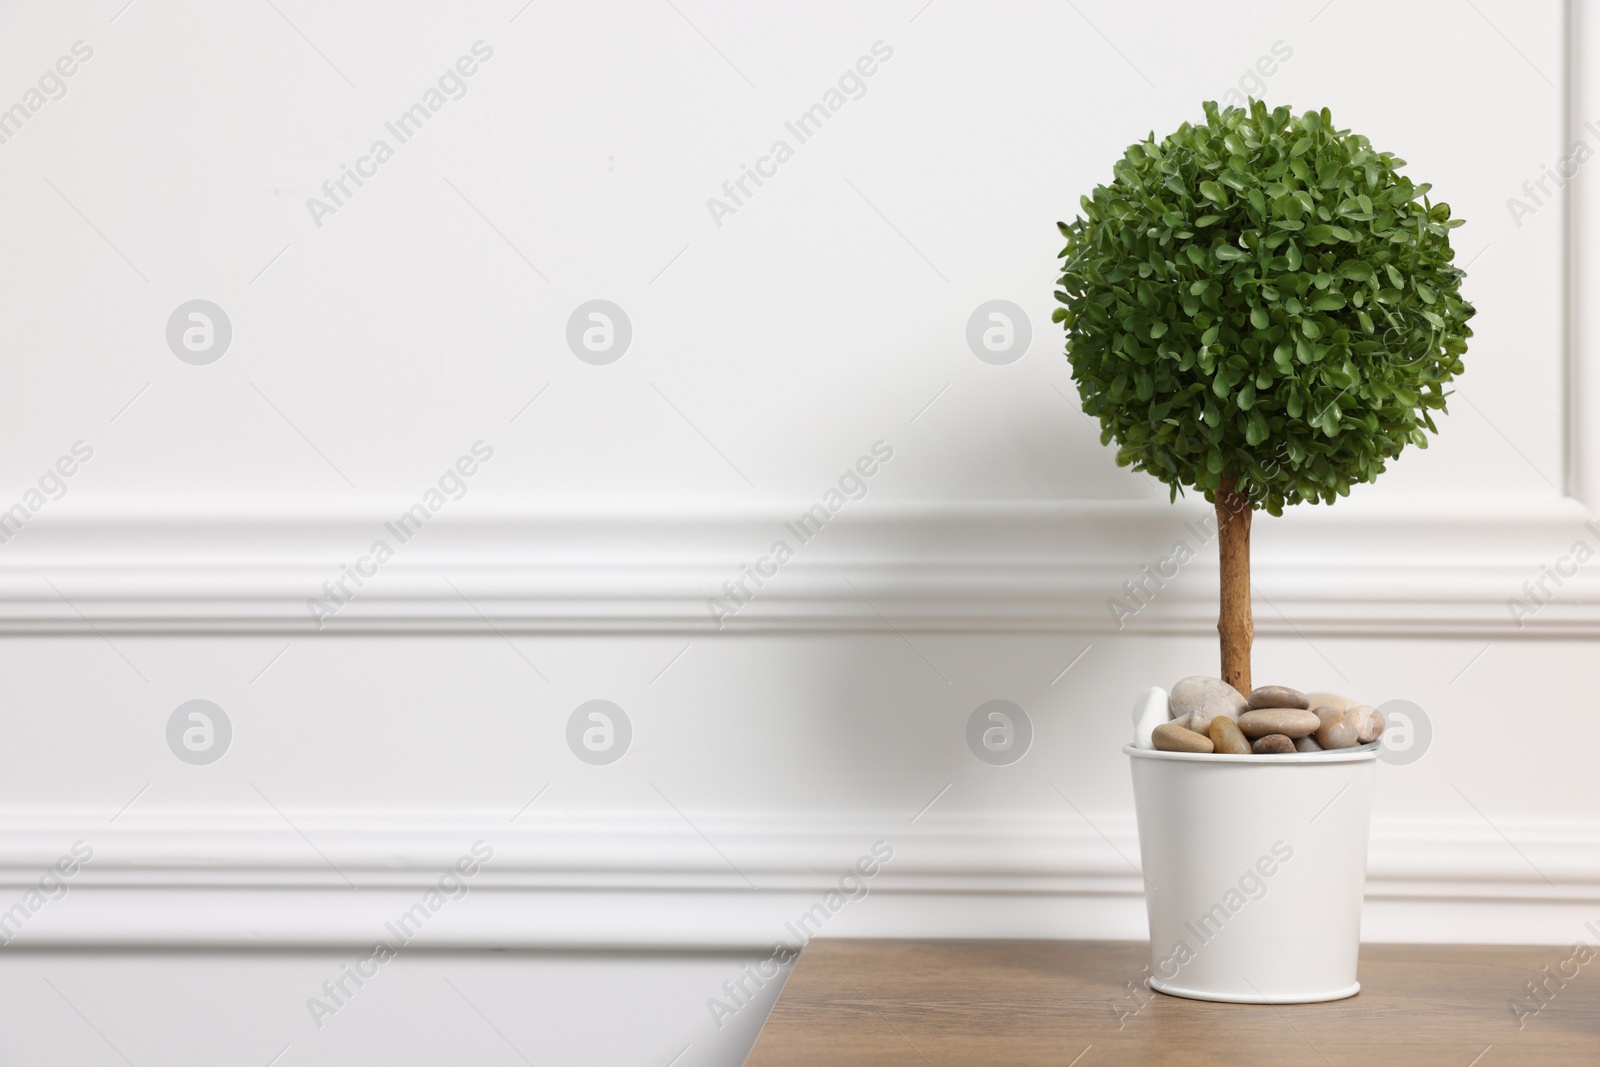 Photo of Green artificial plant in pot on wooden table near white wall, space for text